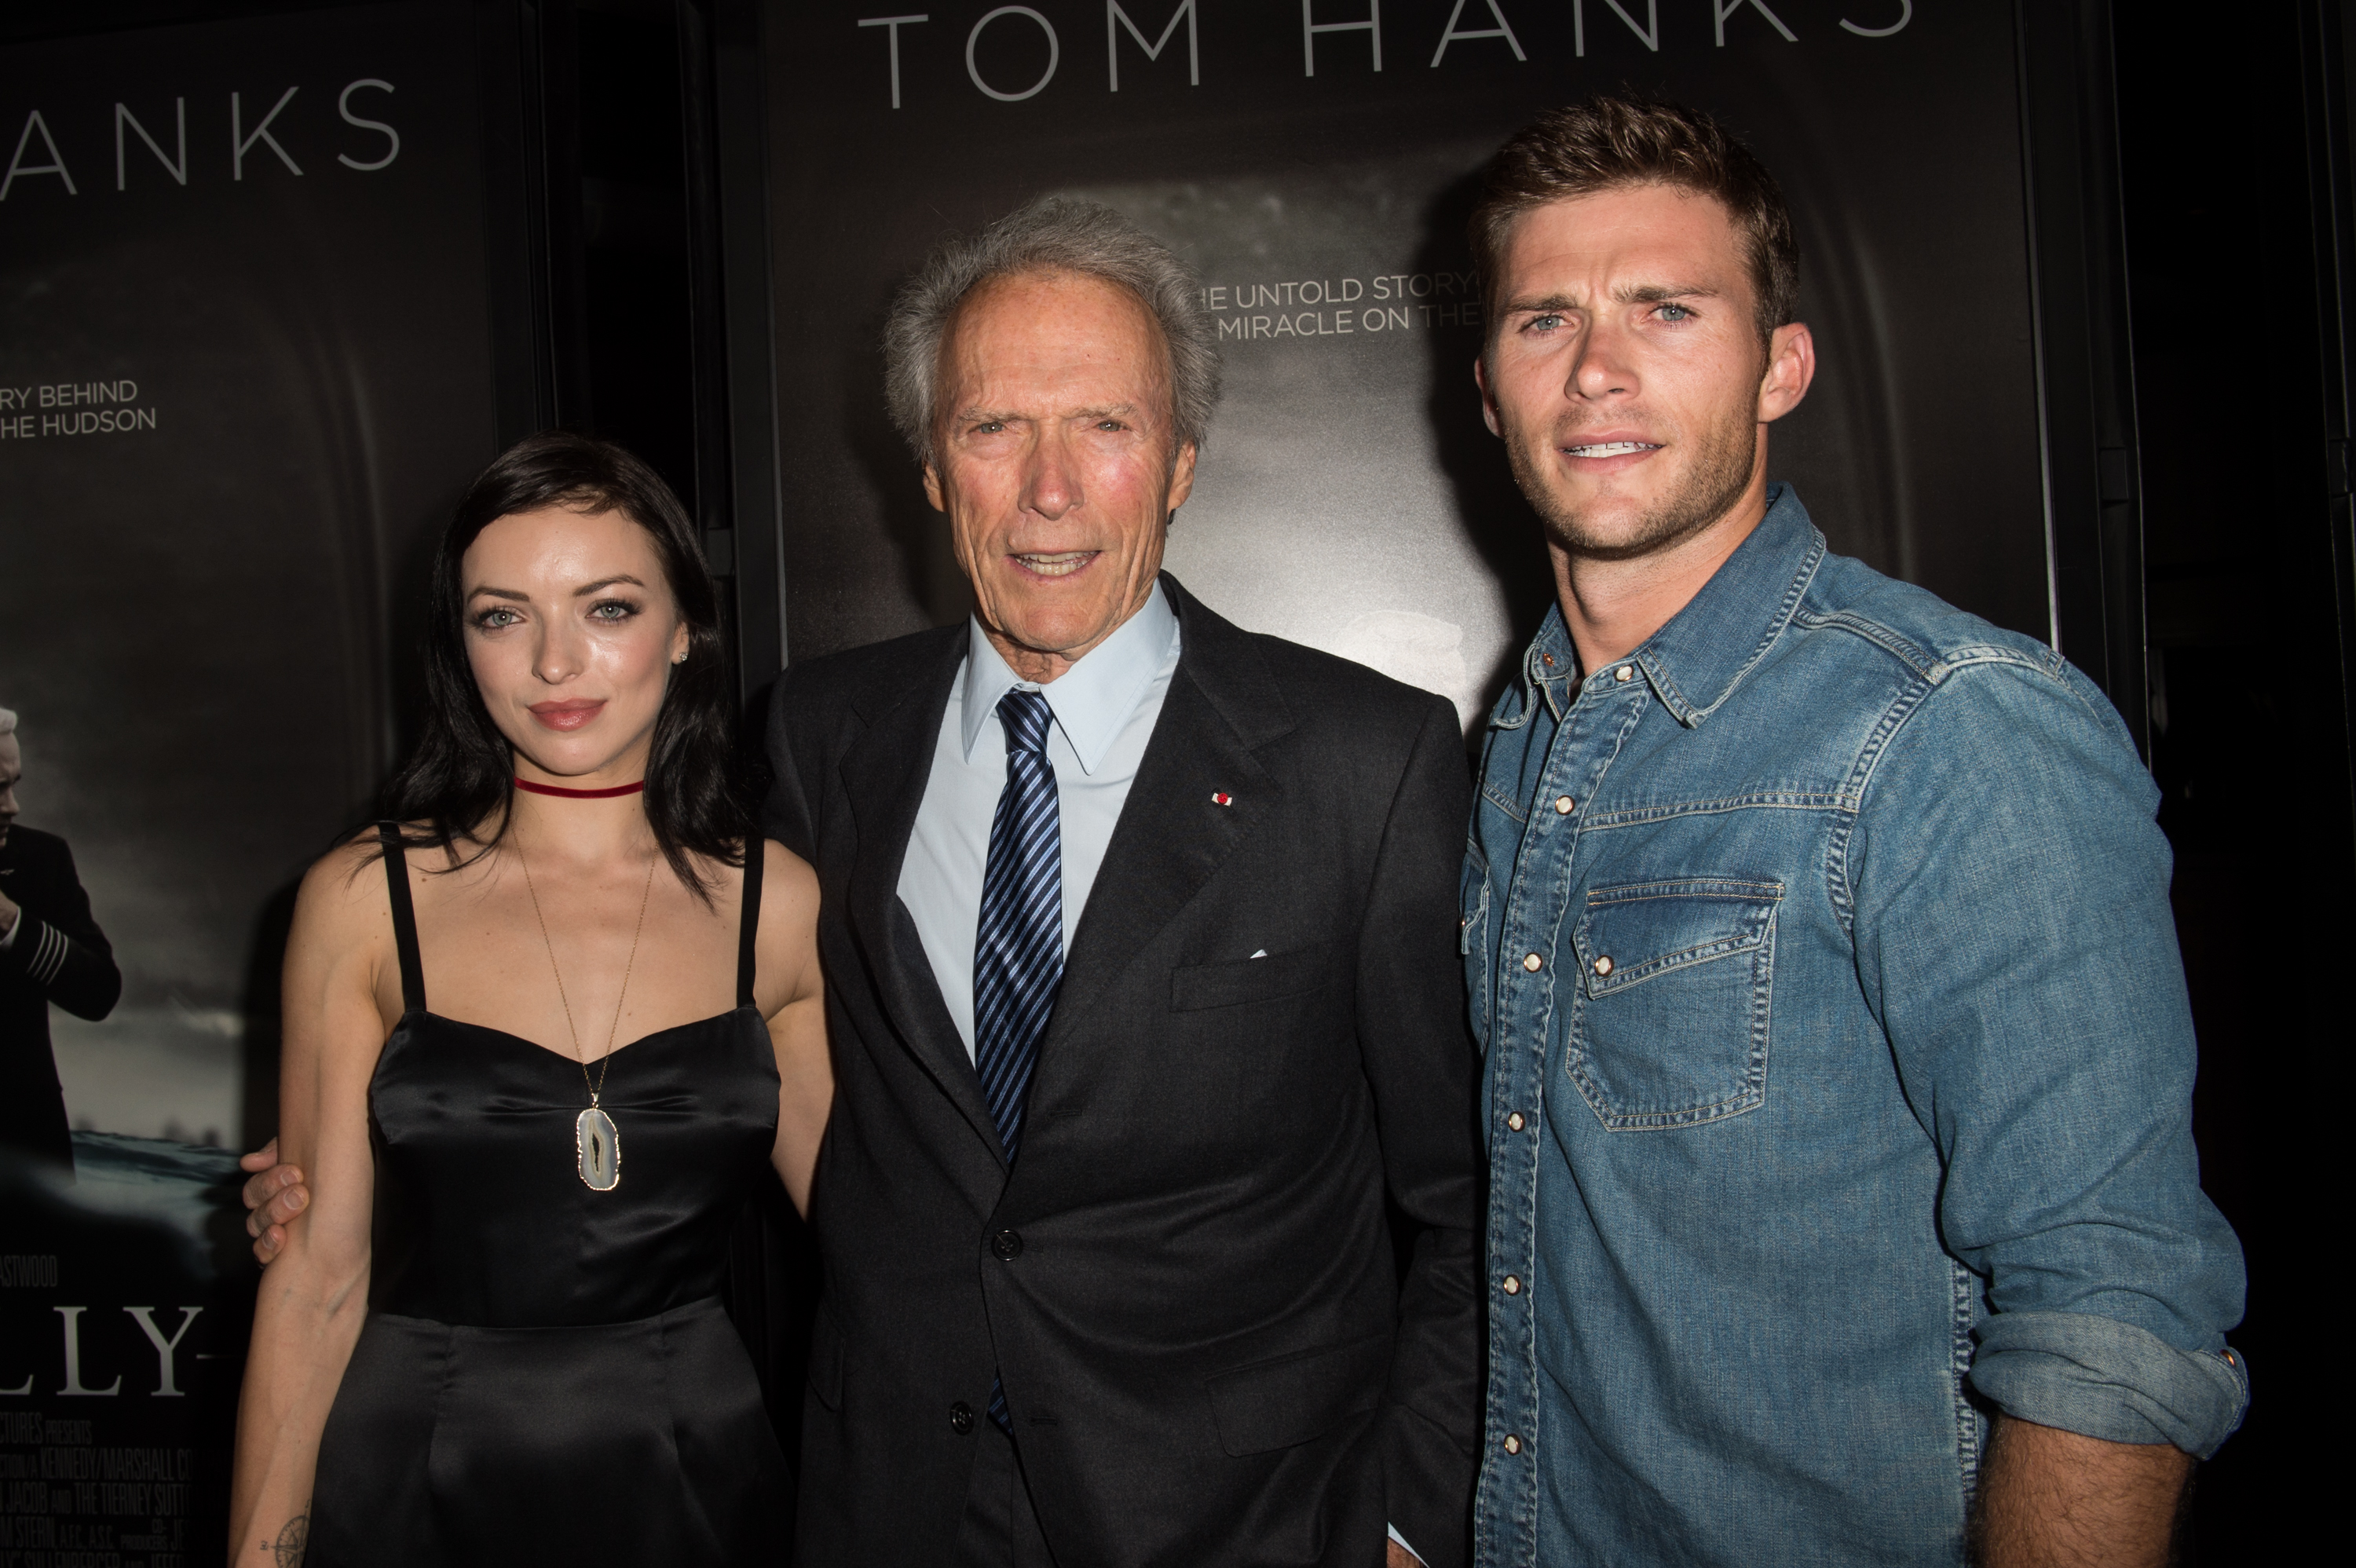 Clint Eastwood with two of his kids, Francesca and Scott Eastwood at the screening of "Sully" in Los Angeles, California on September 8, 2016 | Source: Getty Images